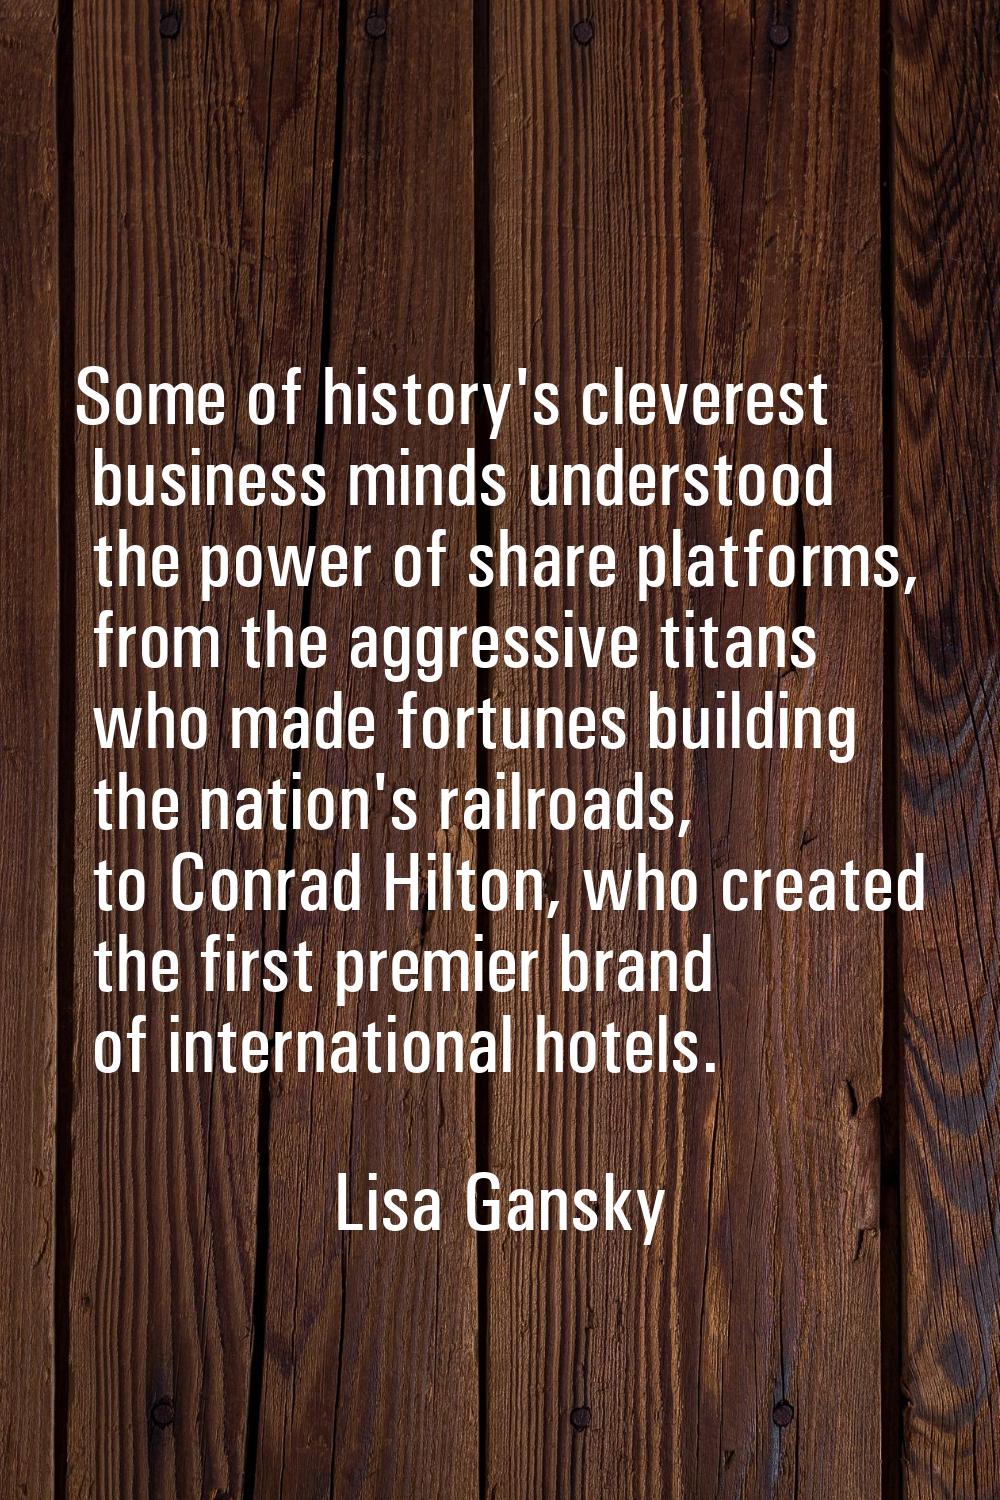 Some of history's cleverest business minds understood the power of share platforms, from the aggres